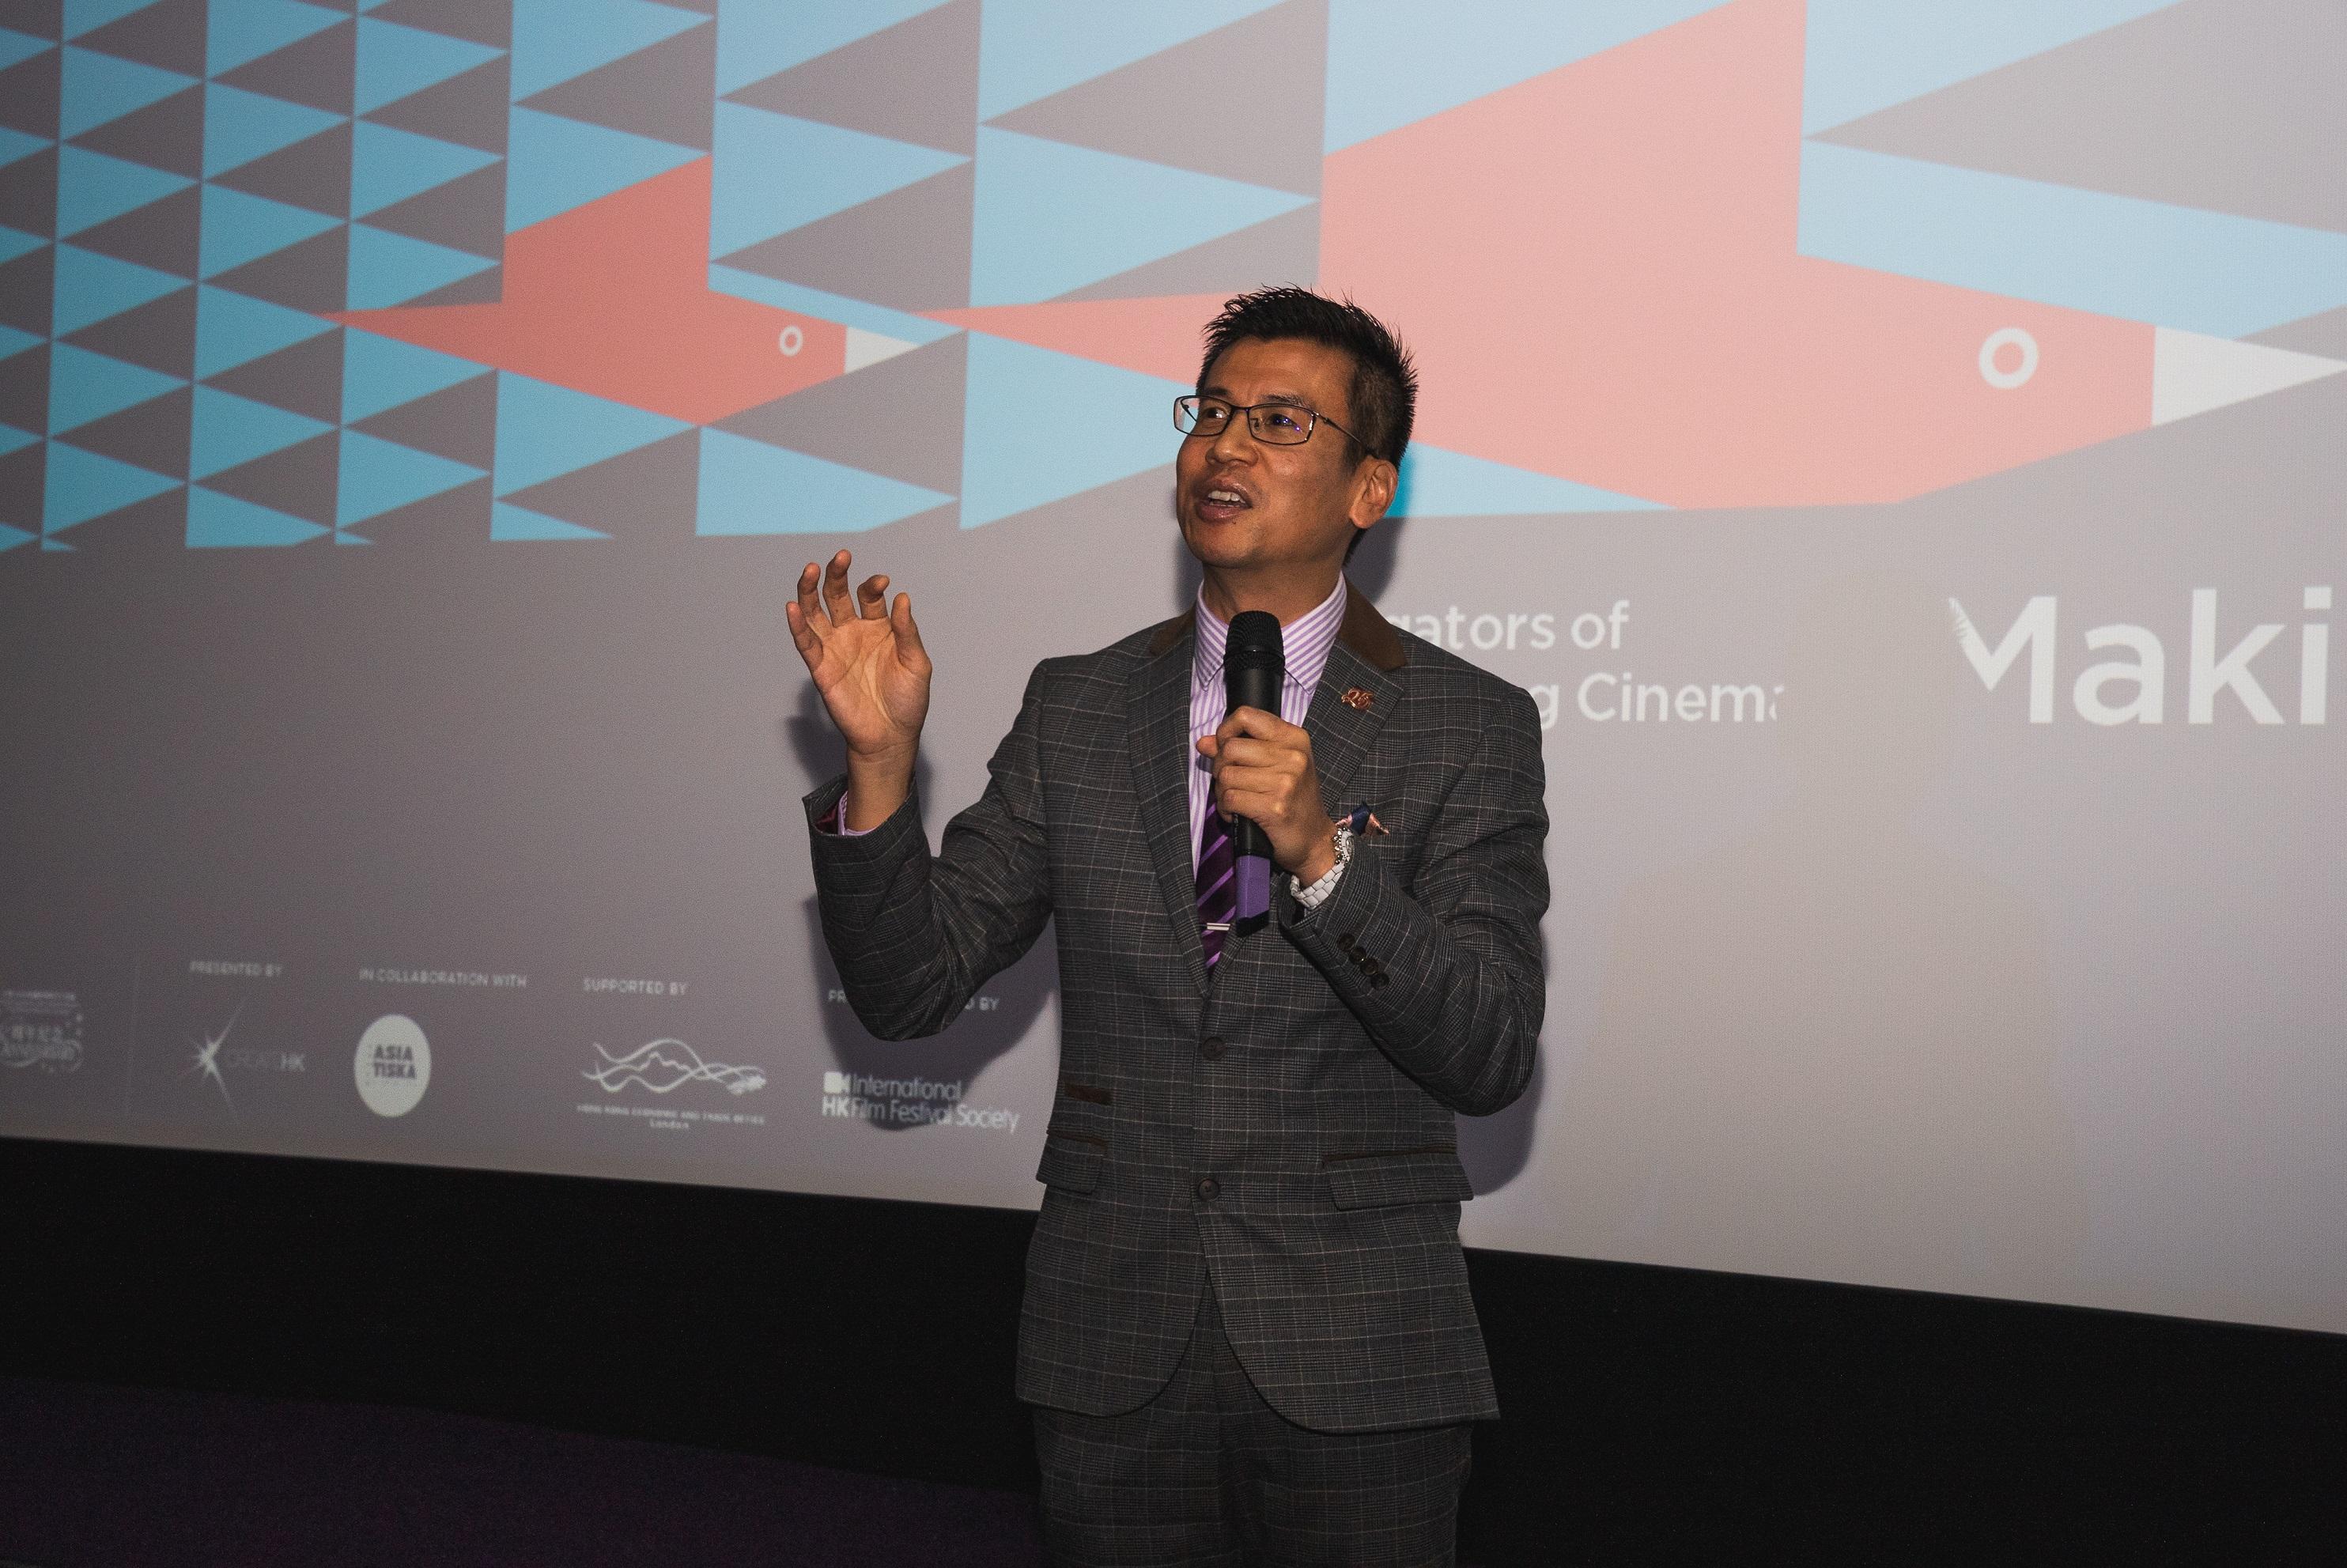 To commemorate the 25th anniversary of the establishment of the Hong Kong Special Administrative Region, the Hong Kong Economic and Trade Office, London (London ETO) supported "Making Waves - Navigators of Hong Kong Cinema", showcasing a selection of Hong Kong films in Sweden, from September 30 to October 9 (Stockholm time). Photo shows the Director-General of the London ETO, Mr Gilford Law, delivering a speech at the opening screening of the film festival.